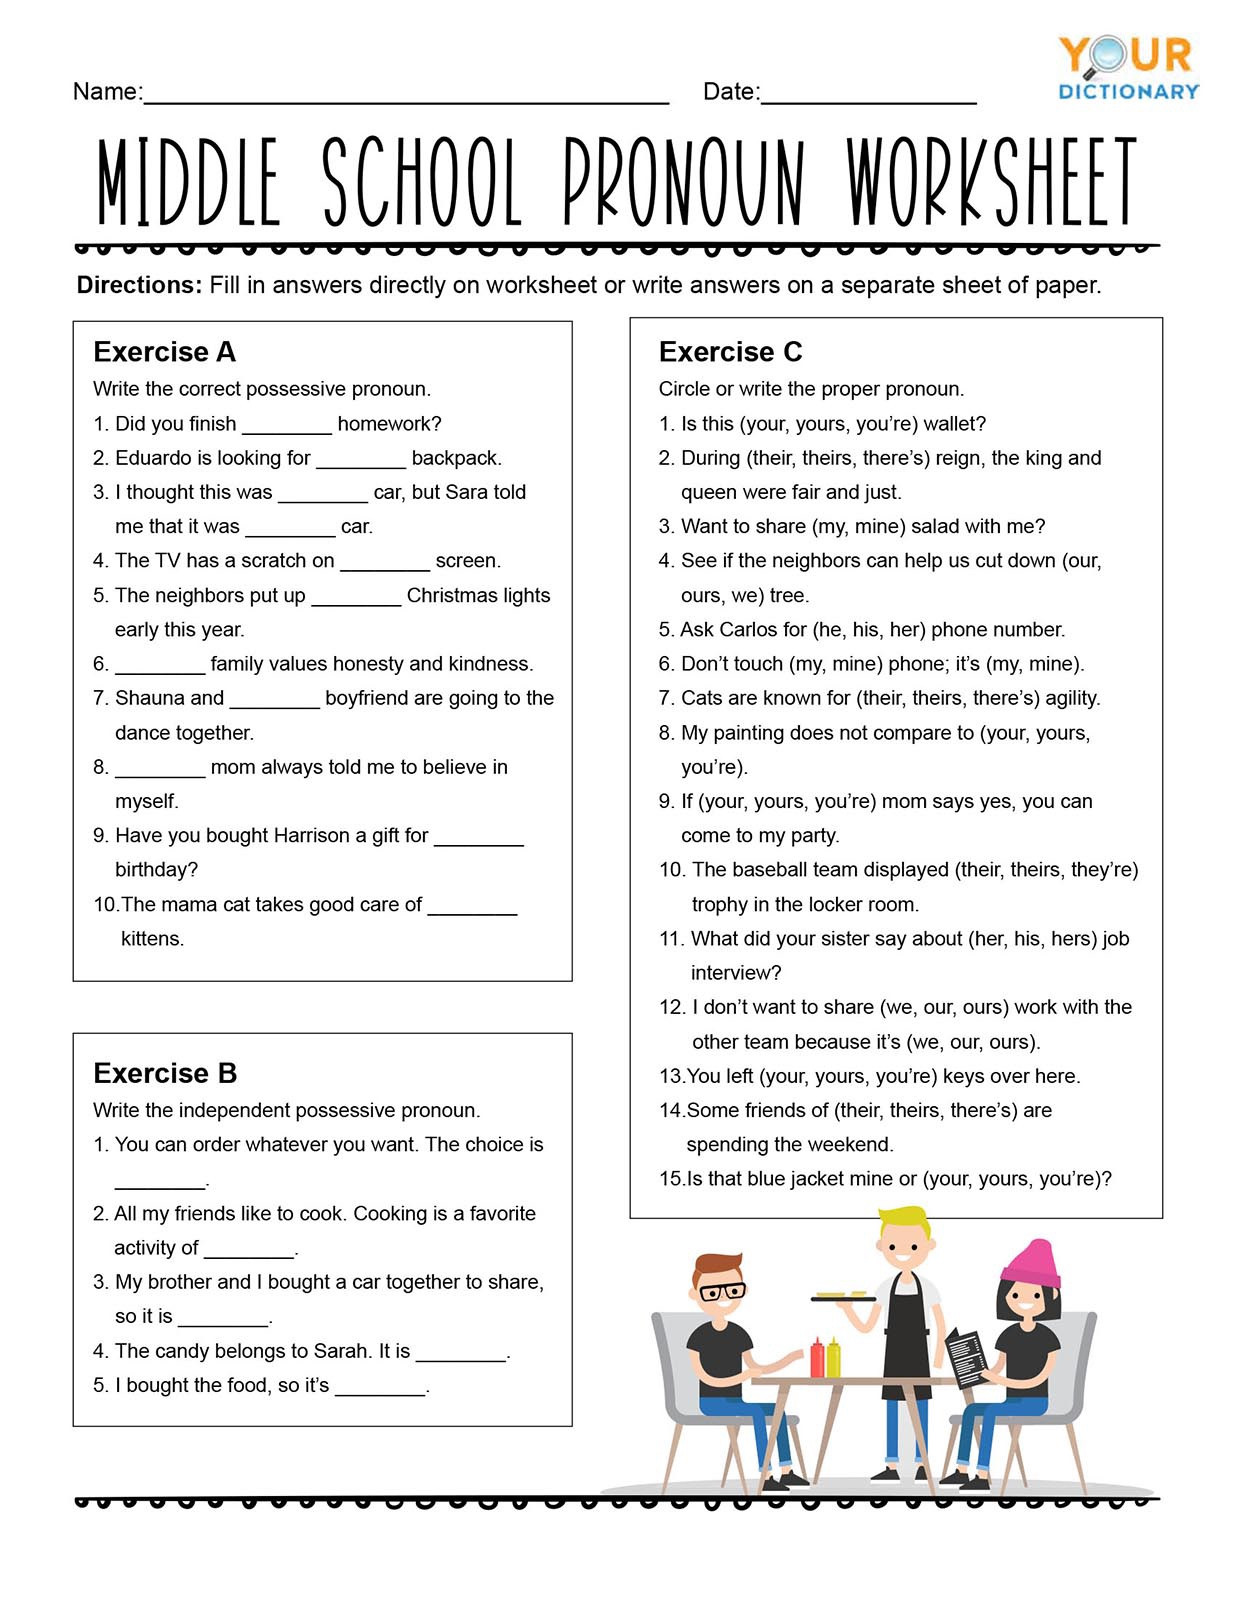 Pronoun Worksheets 6th Grade Pronoun Worksheets for Practice and Review